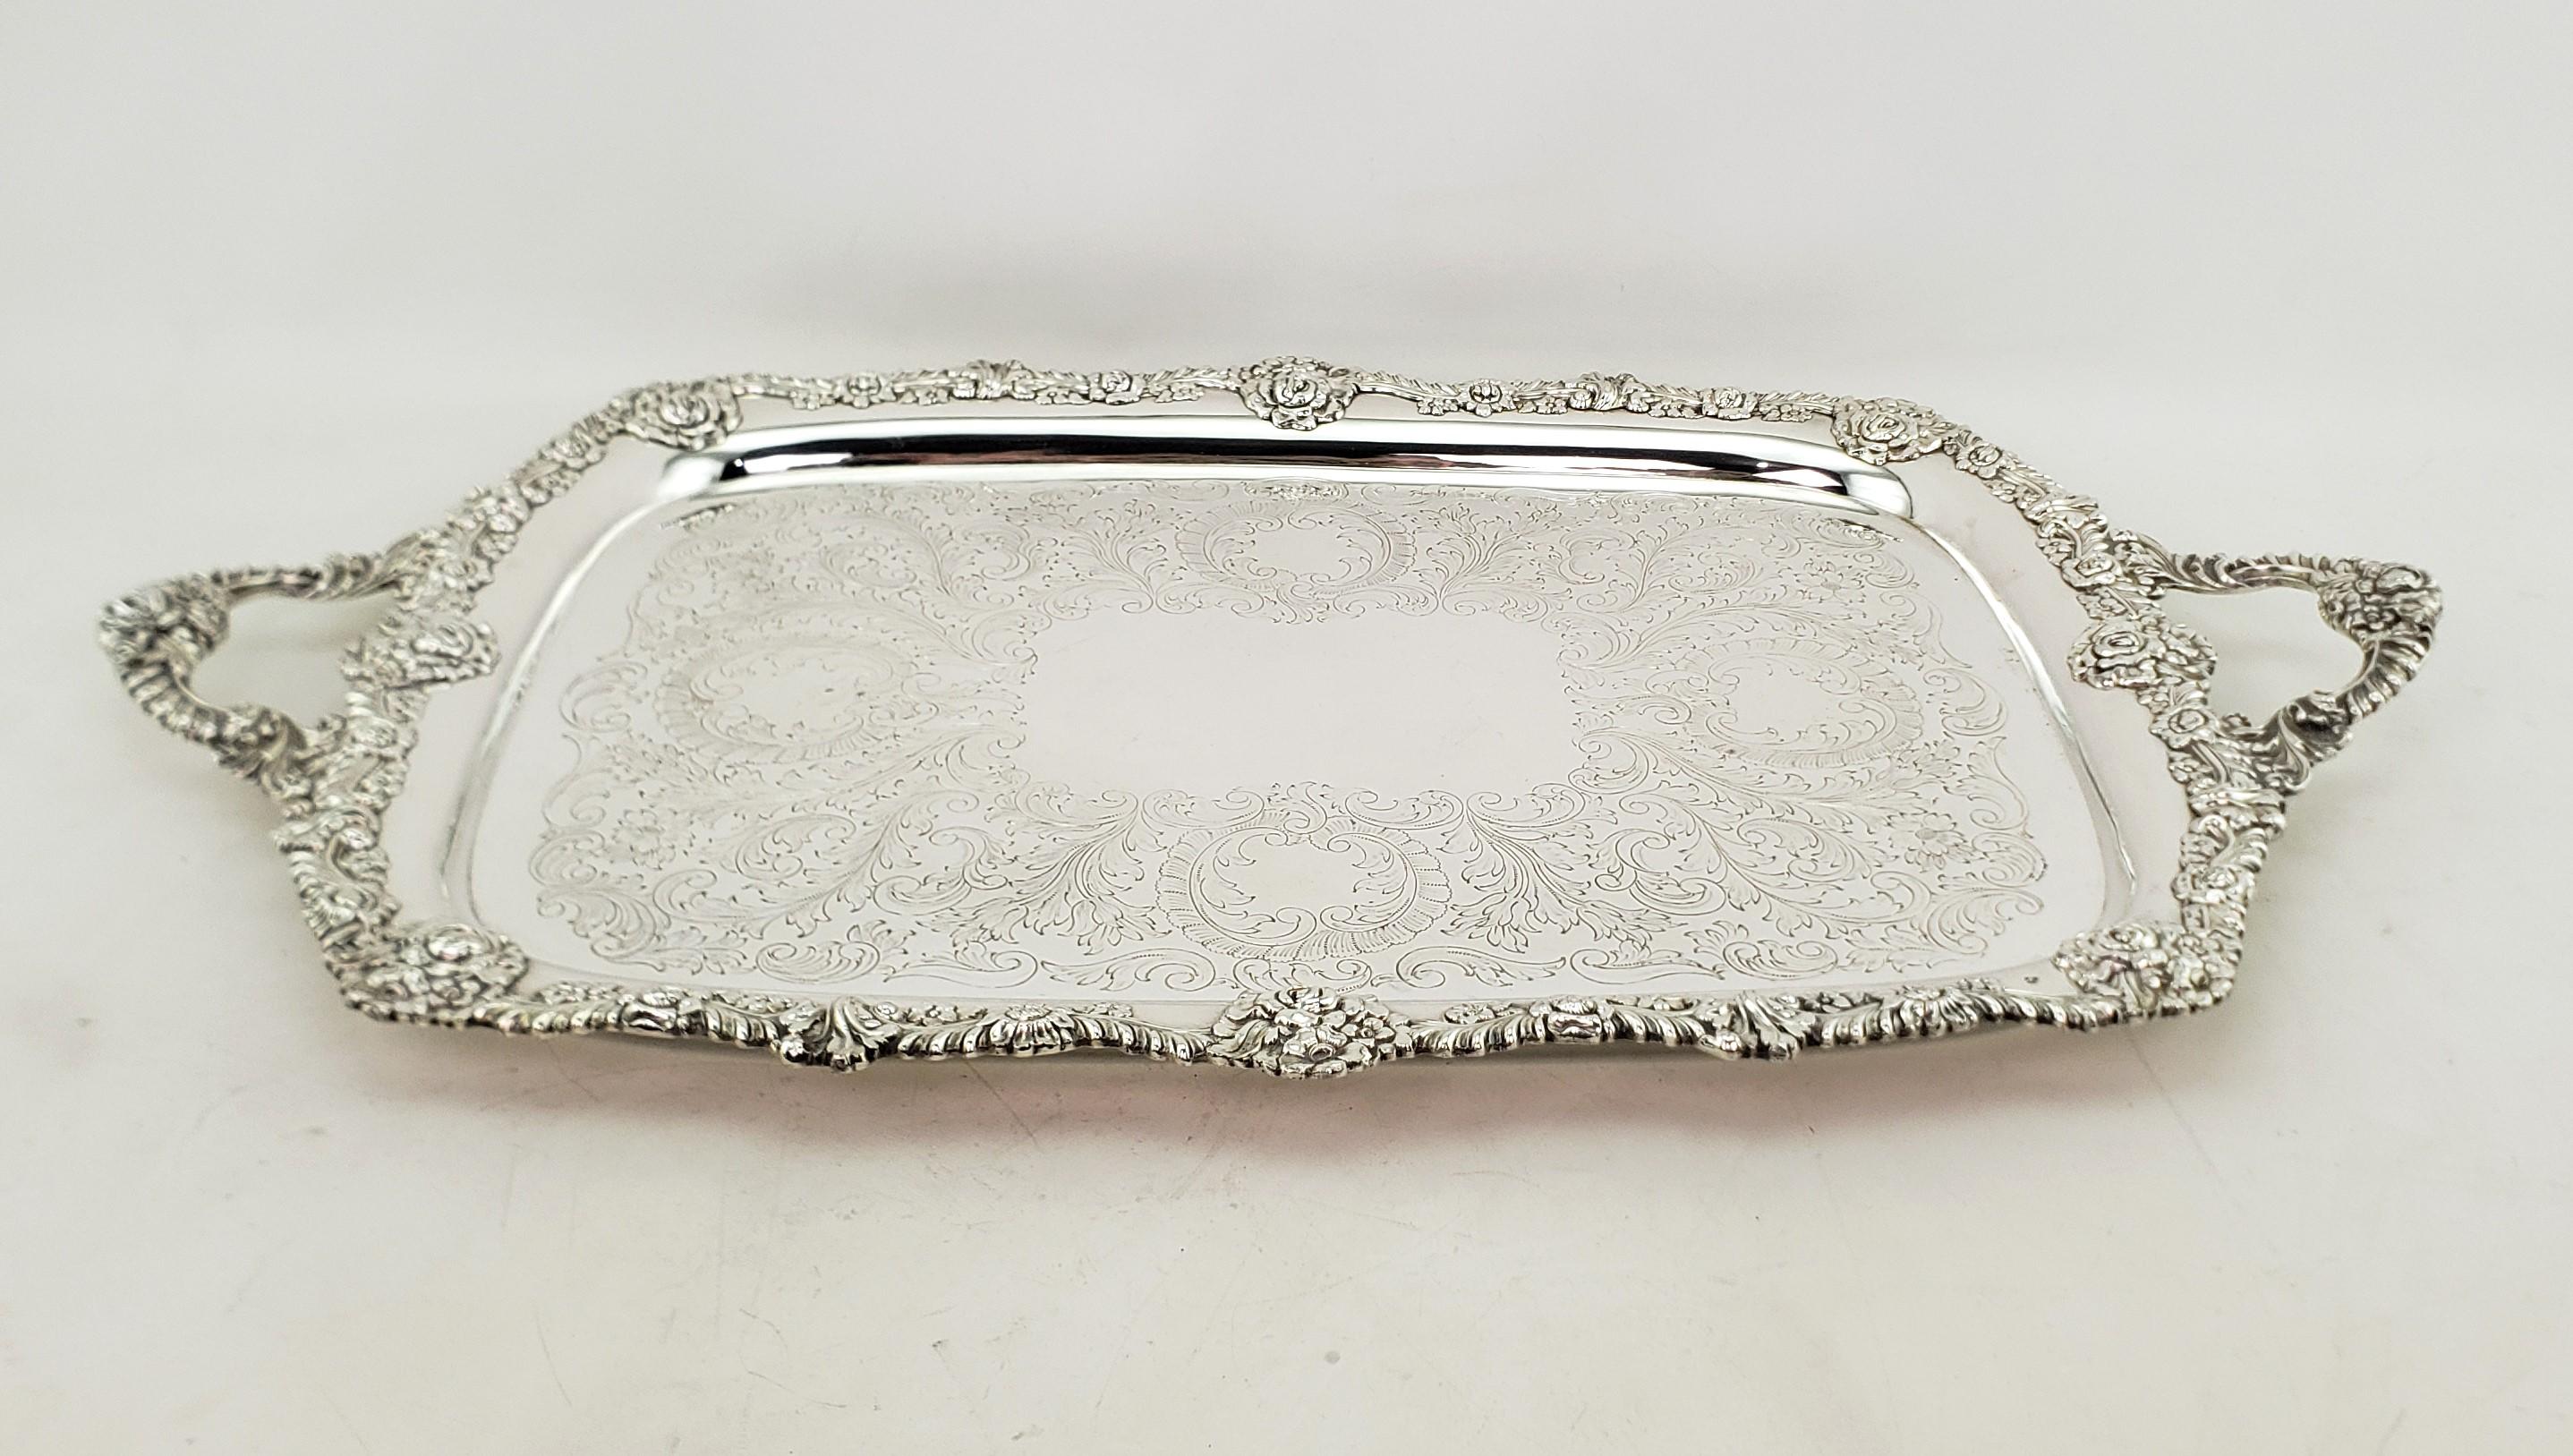 This very large antique serving tray is hallmarked by an unknown maker and originated from England and dates to approximately 1920 and done in a Victorian style. The tray is composed of silver plate and features a very ornate applied floral